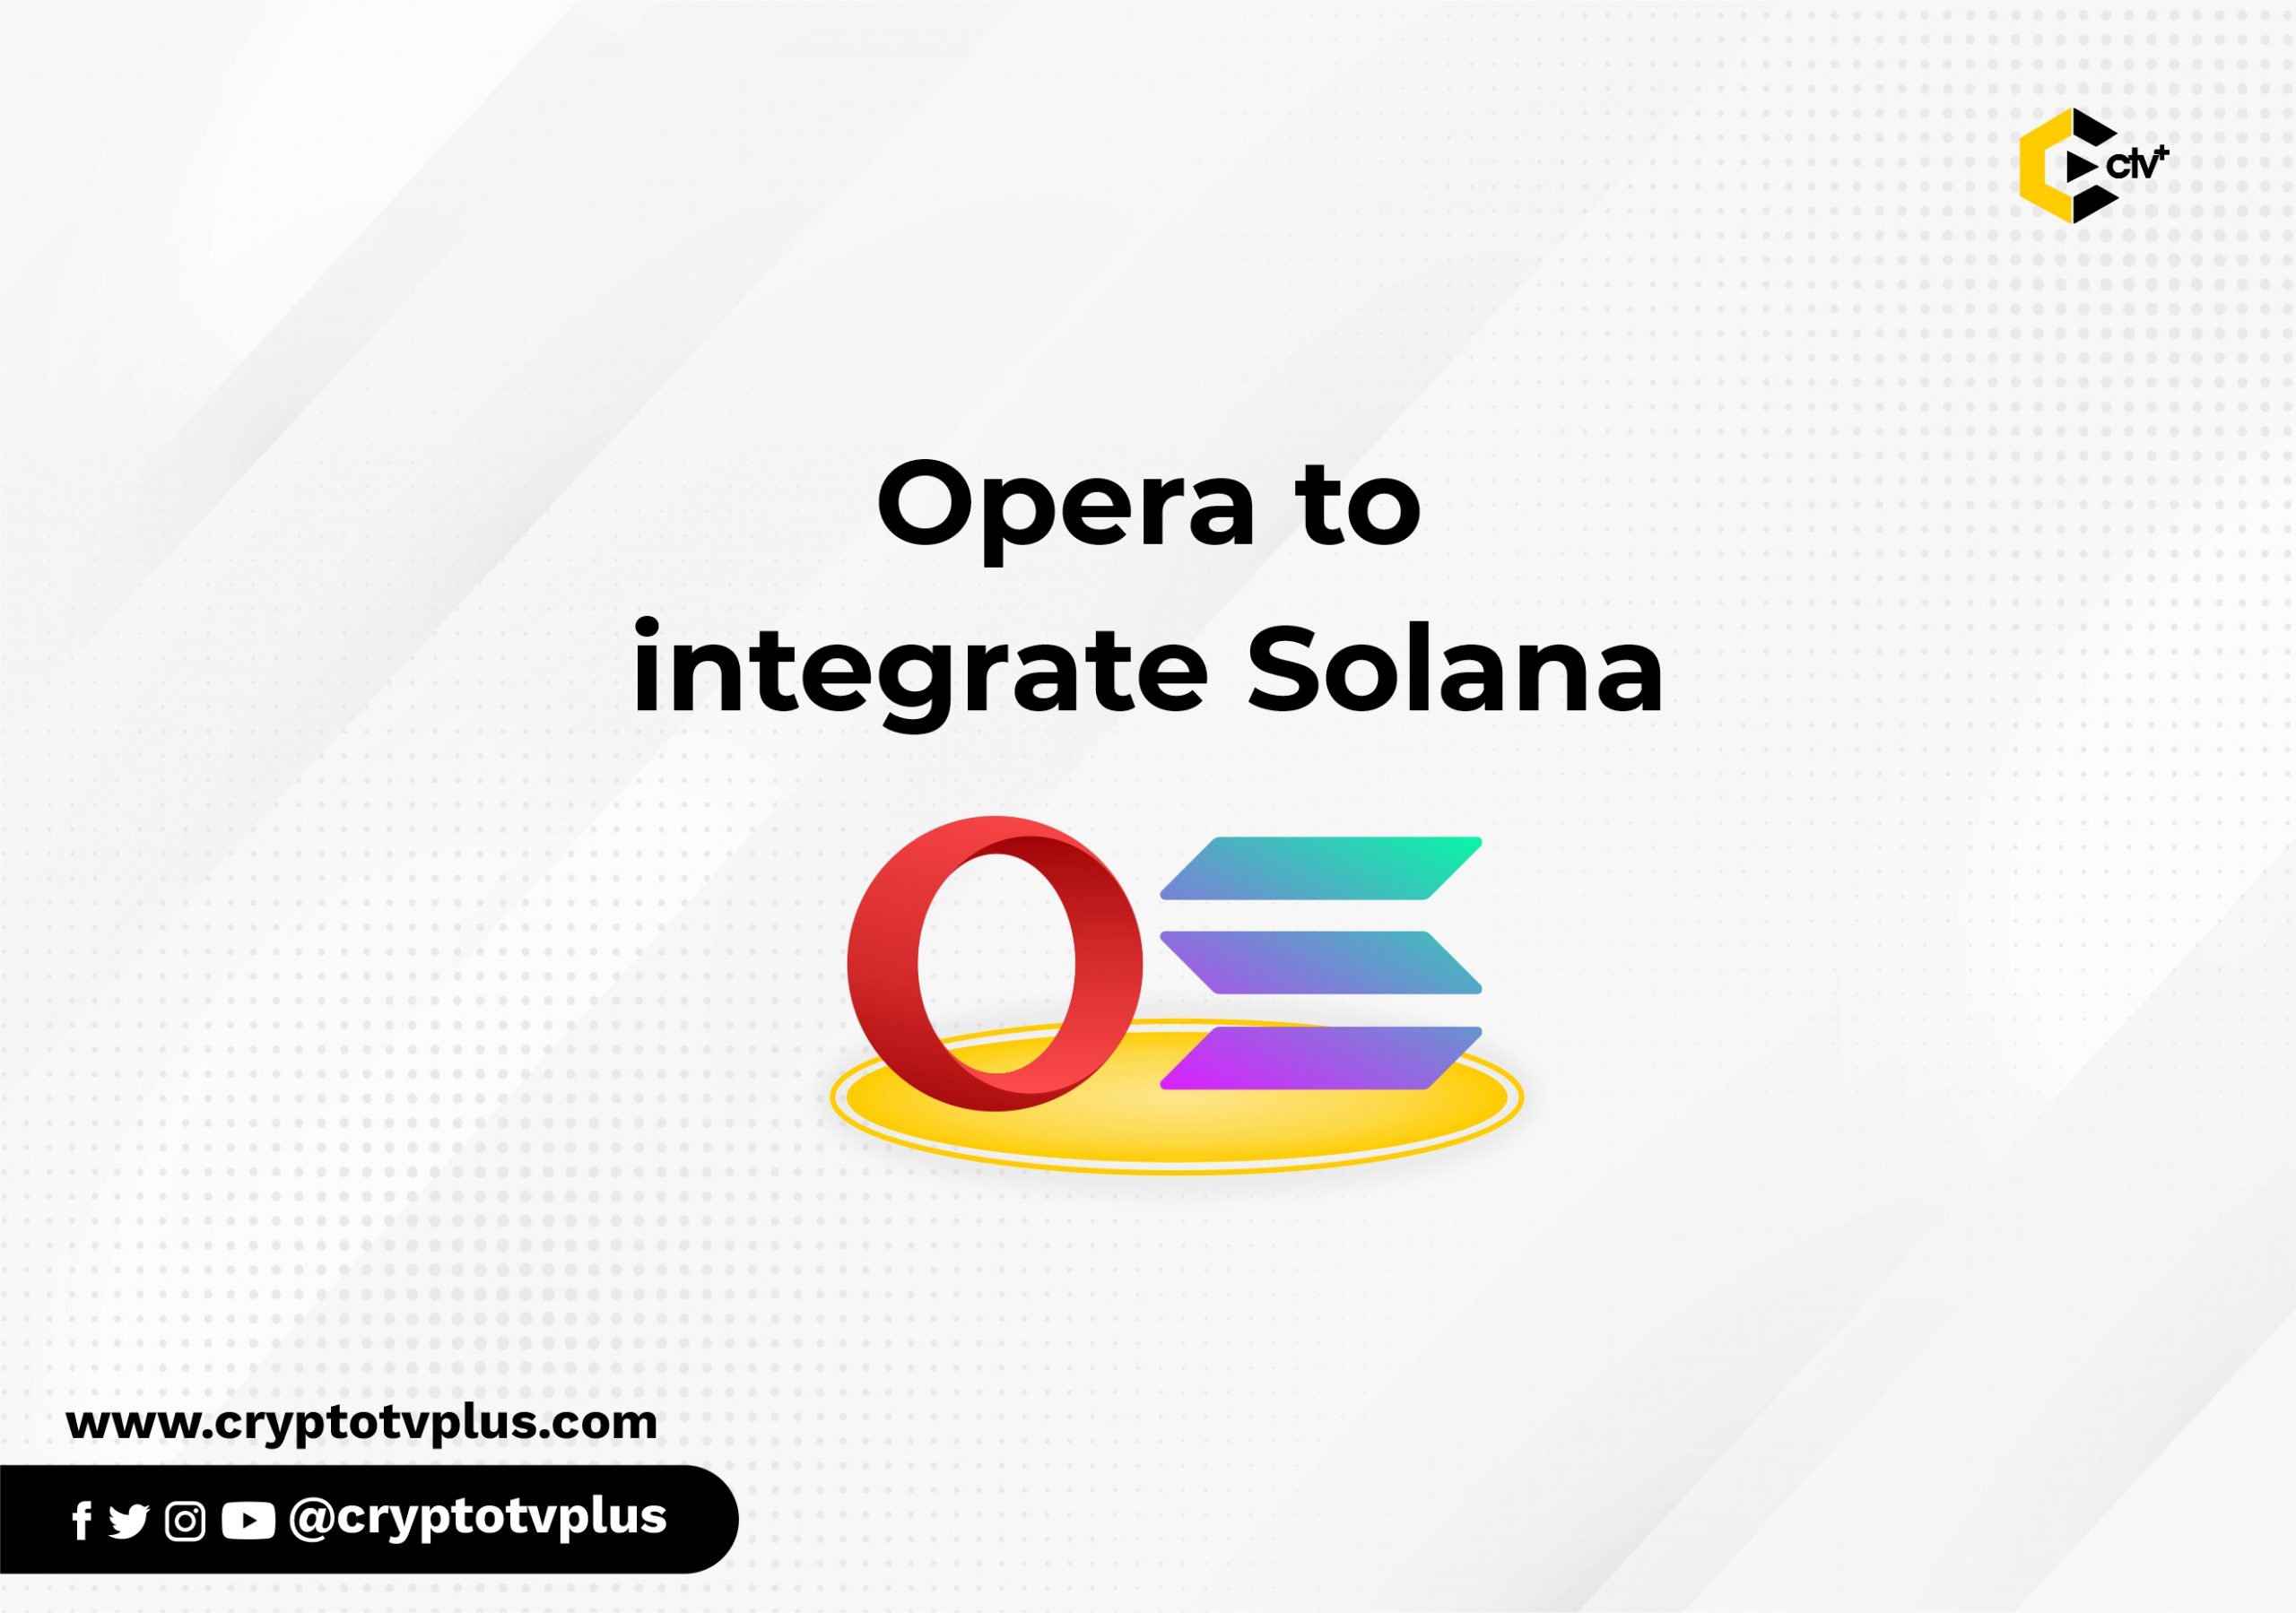 Opera Announces Support for Solana